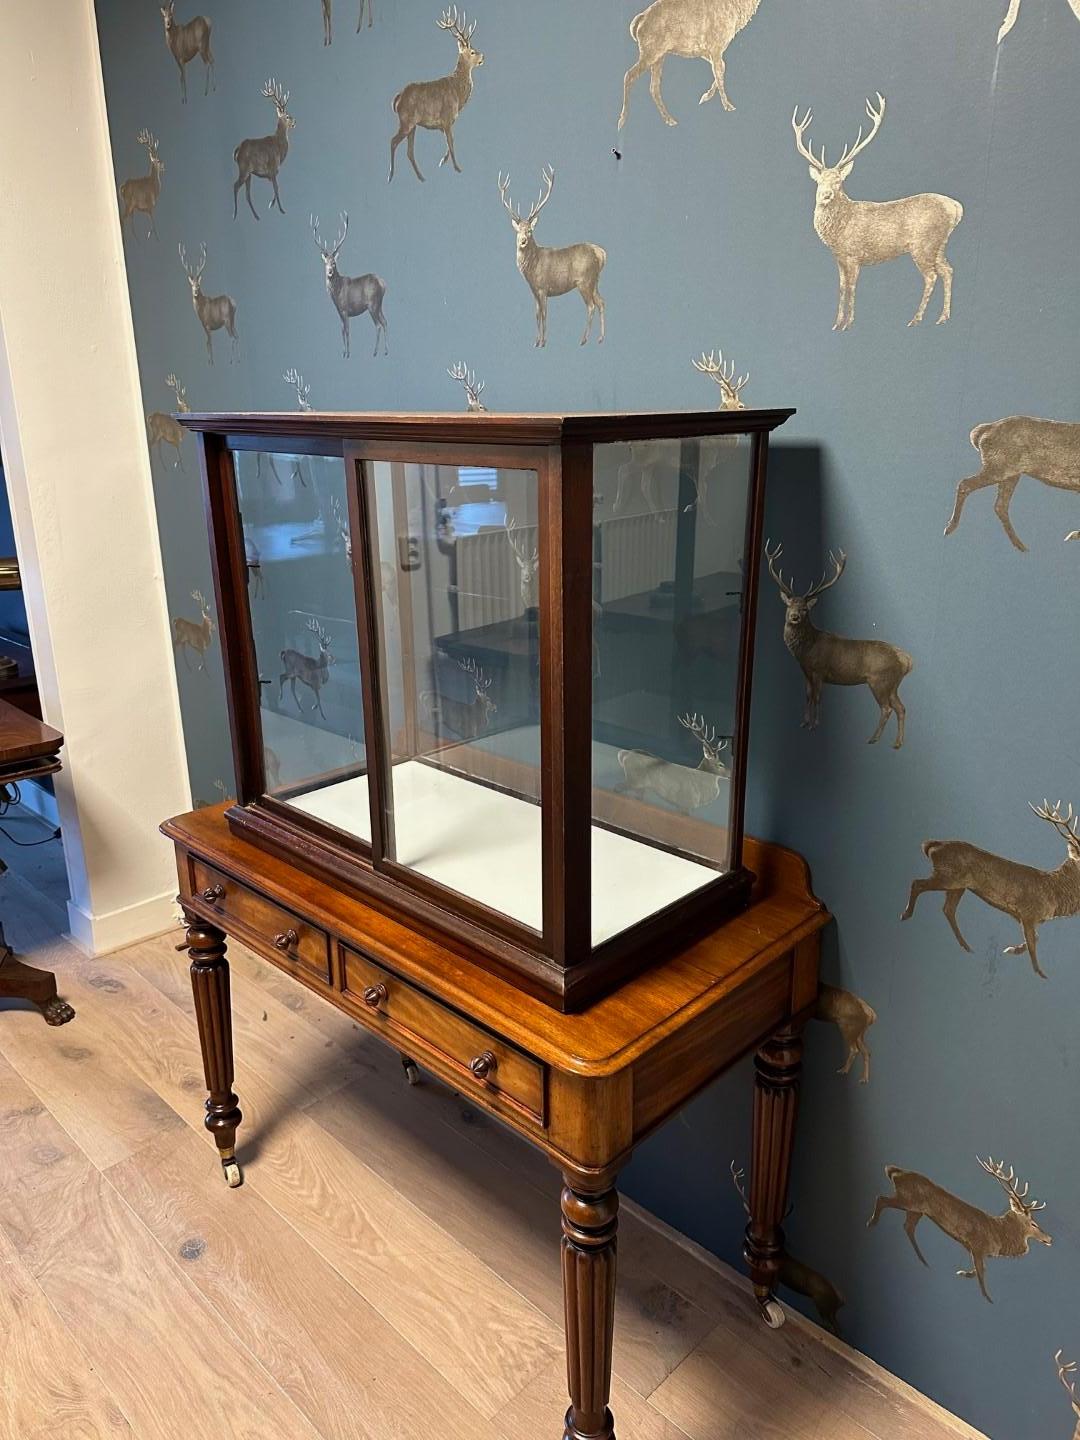 Antique mahogany display case in good and original condition. The display case has 2 sliding doors. There are supports for an extra glass shelf. Extra shelf is not included. The table on which the display case stands is not part of the display